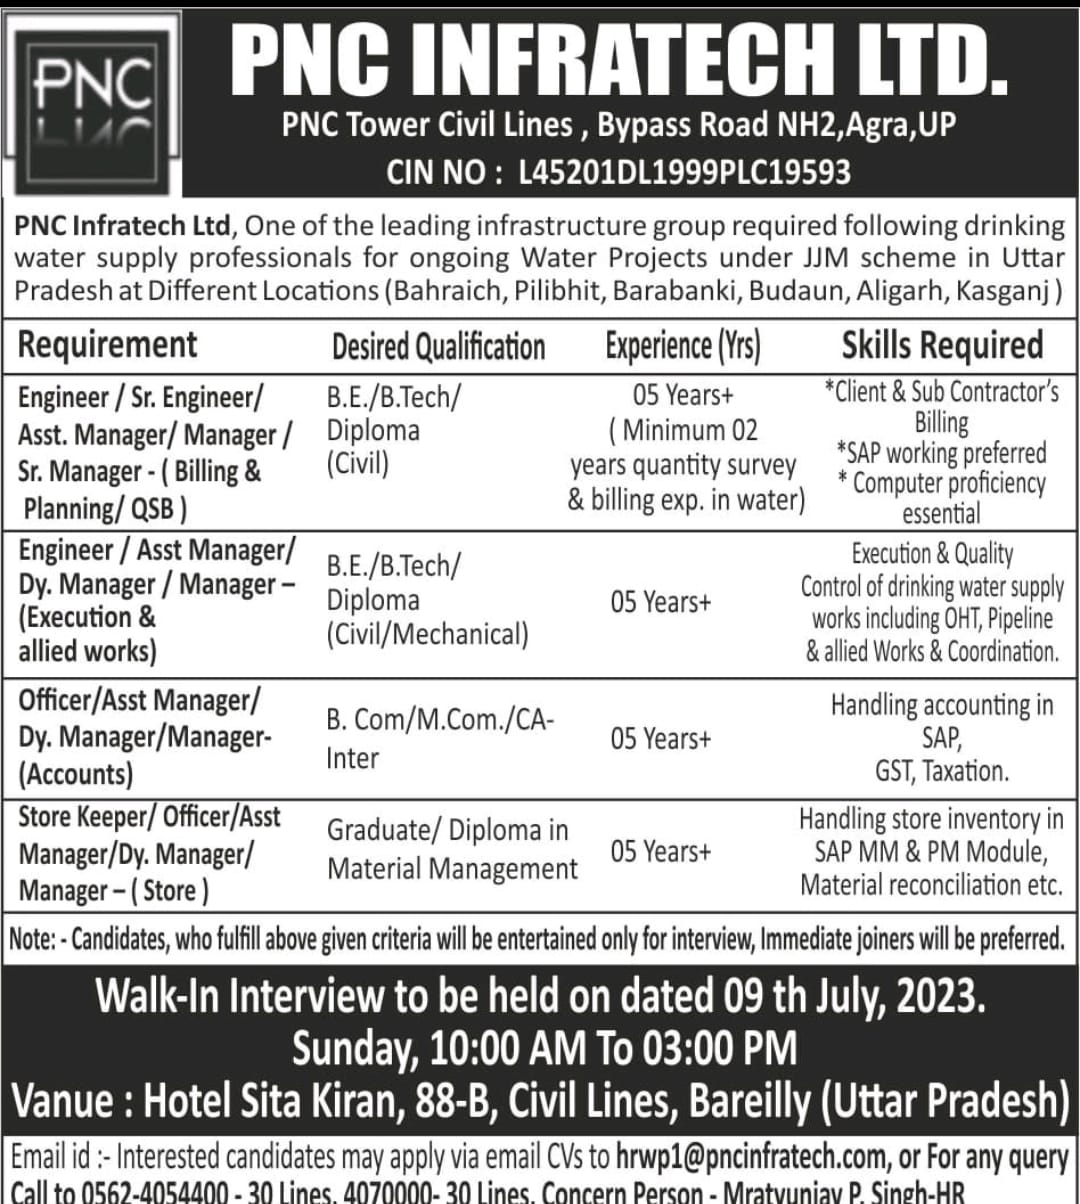 PNC Infratech Limited